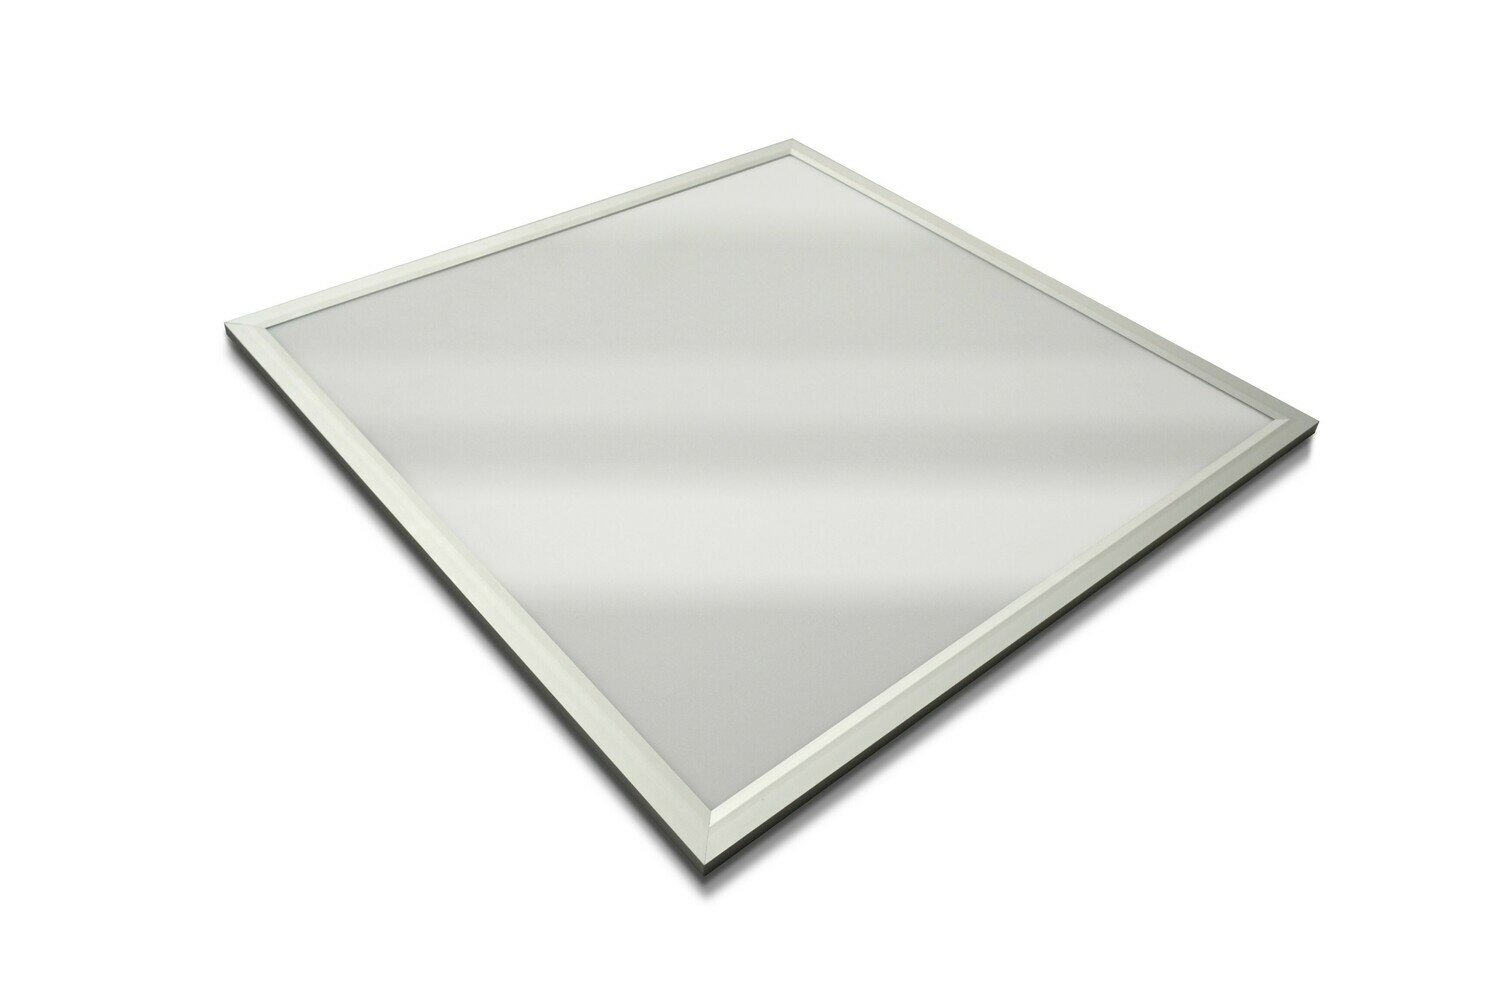 ProLuce® LED Panel PIAZZA SP 595x595x10 mm 36W, 3000K, 3240 lm, 110°, IP20, weiss, 0-10V dimmbar